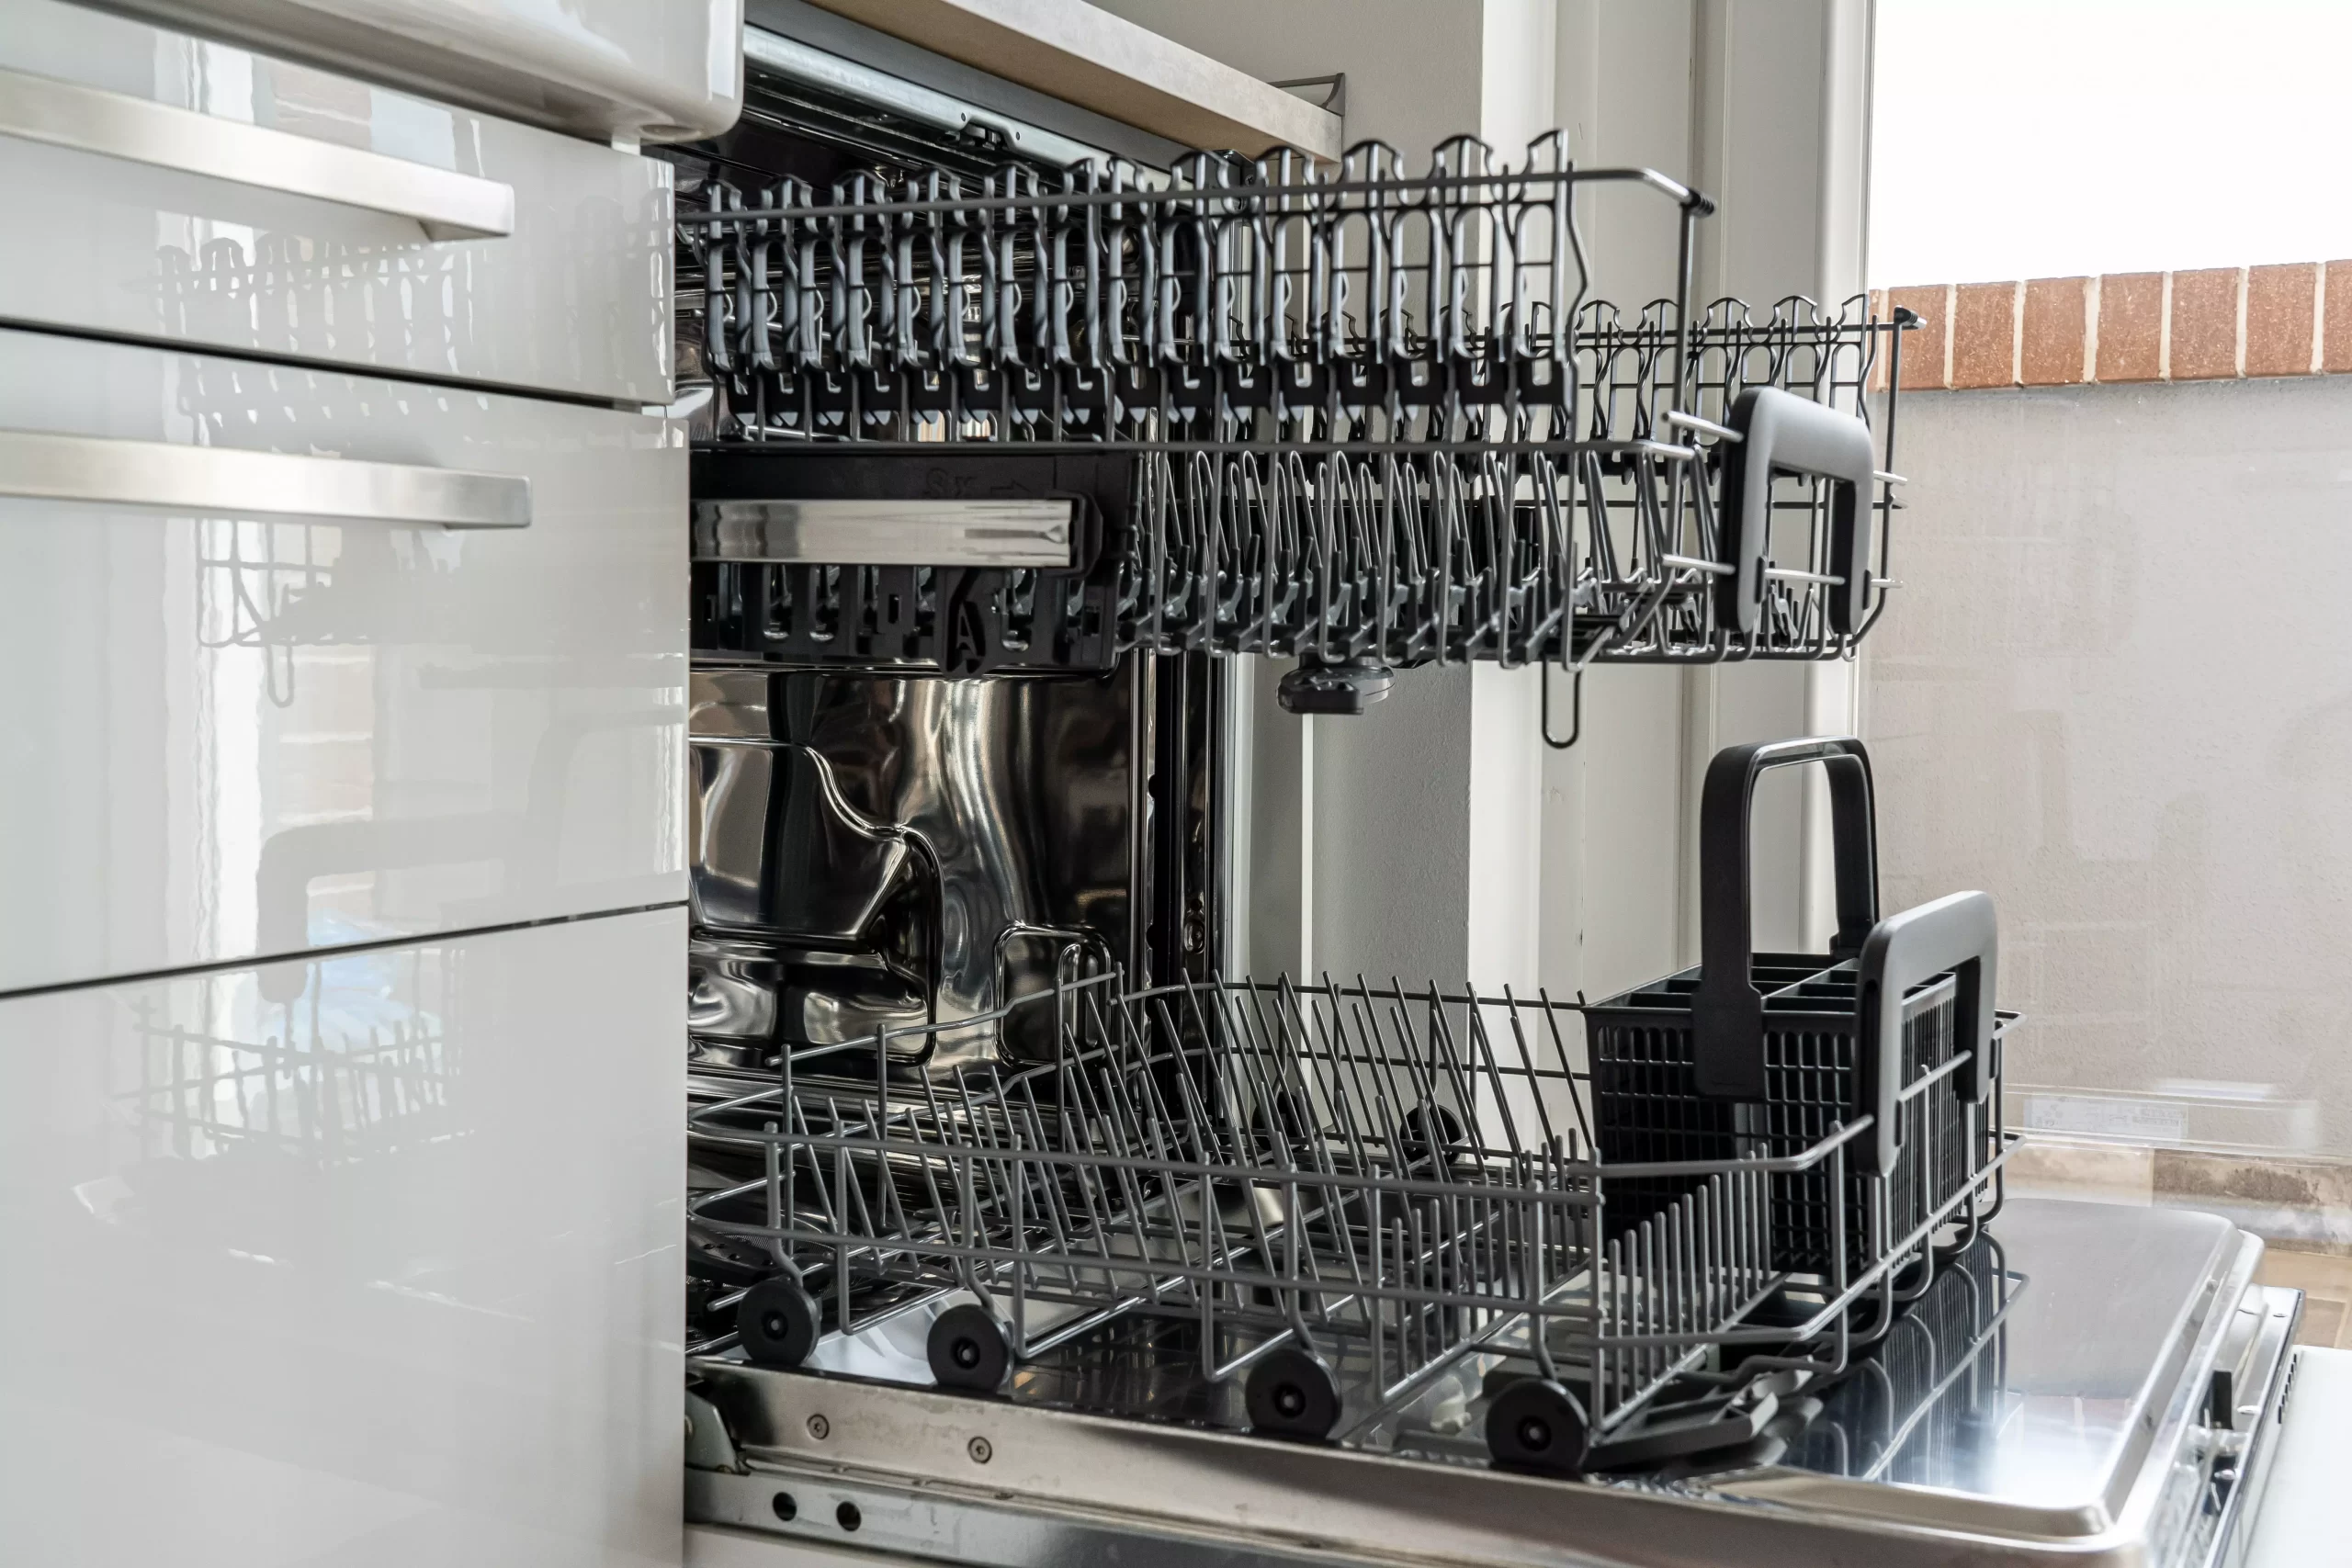 How to Clean Dishwasher With Vinegar and Baking Soda